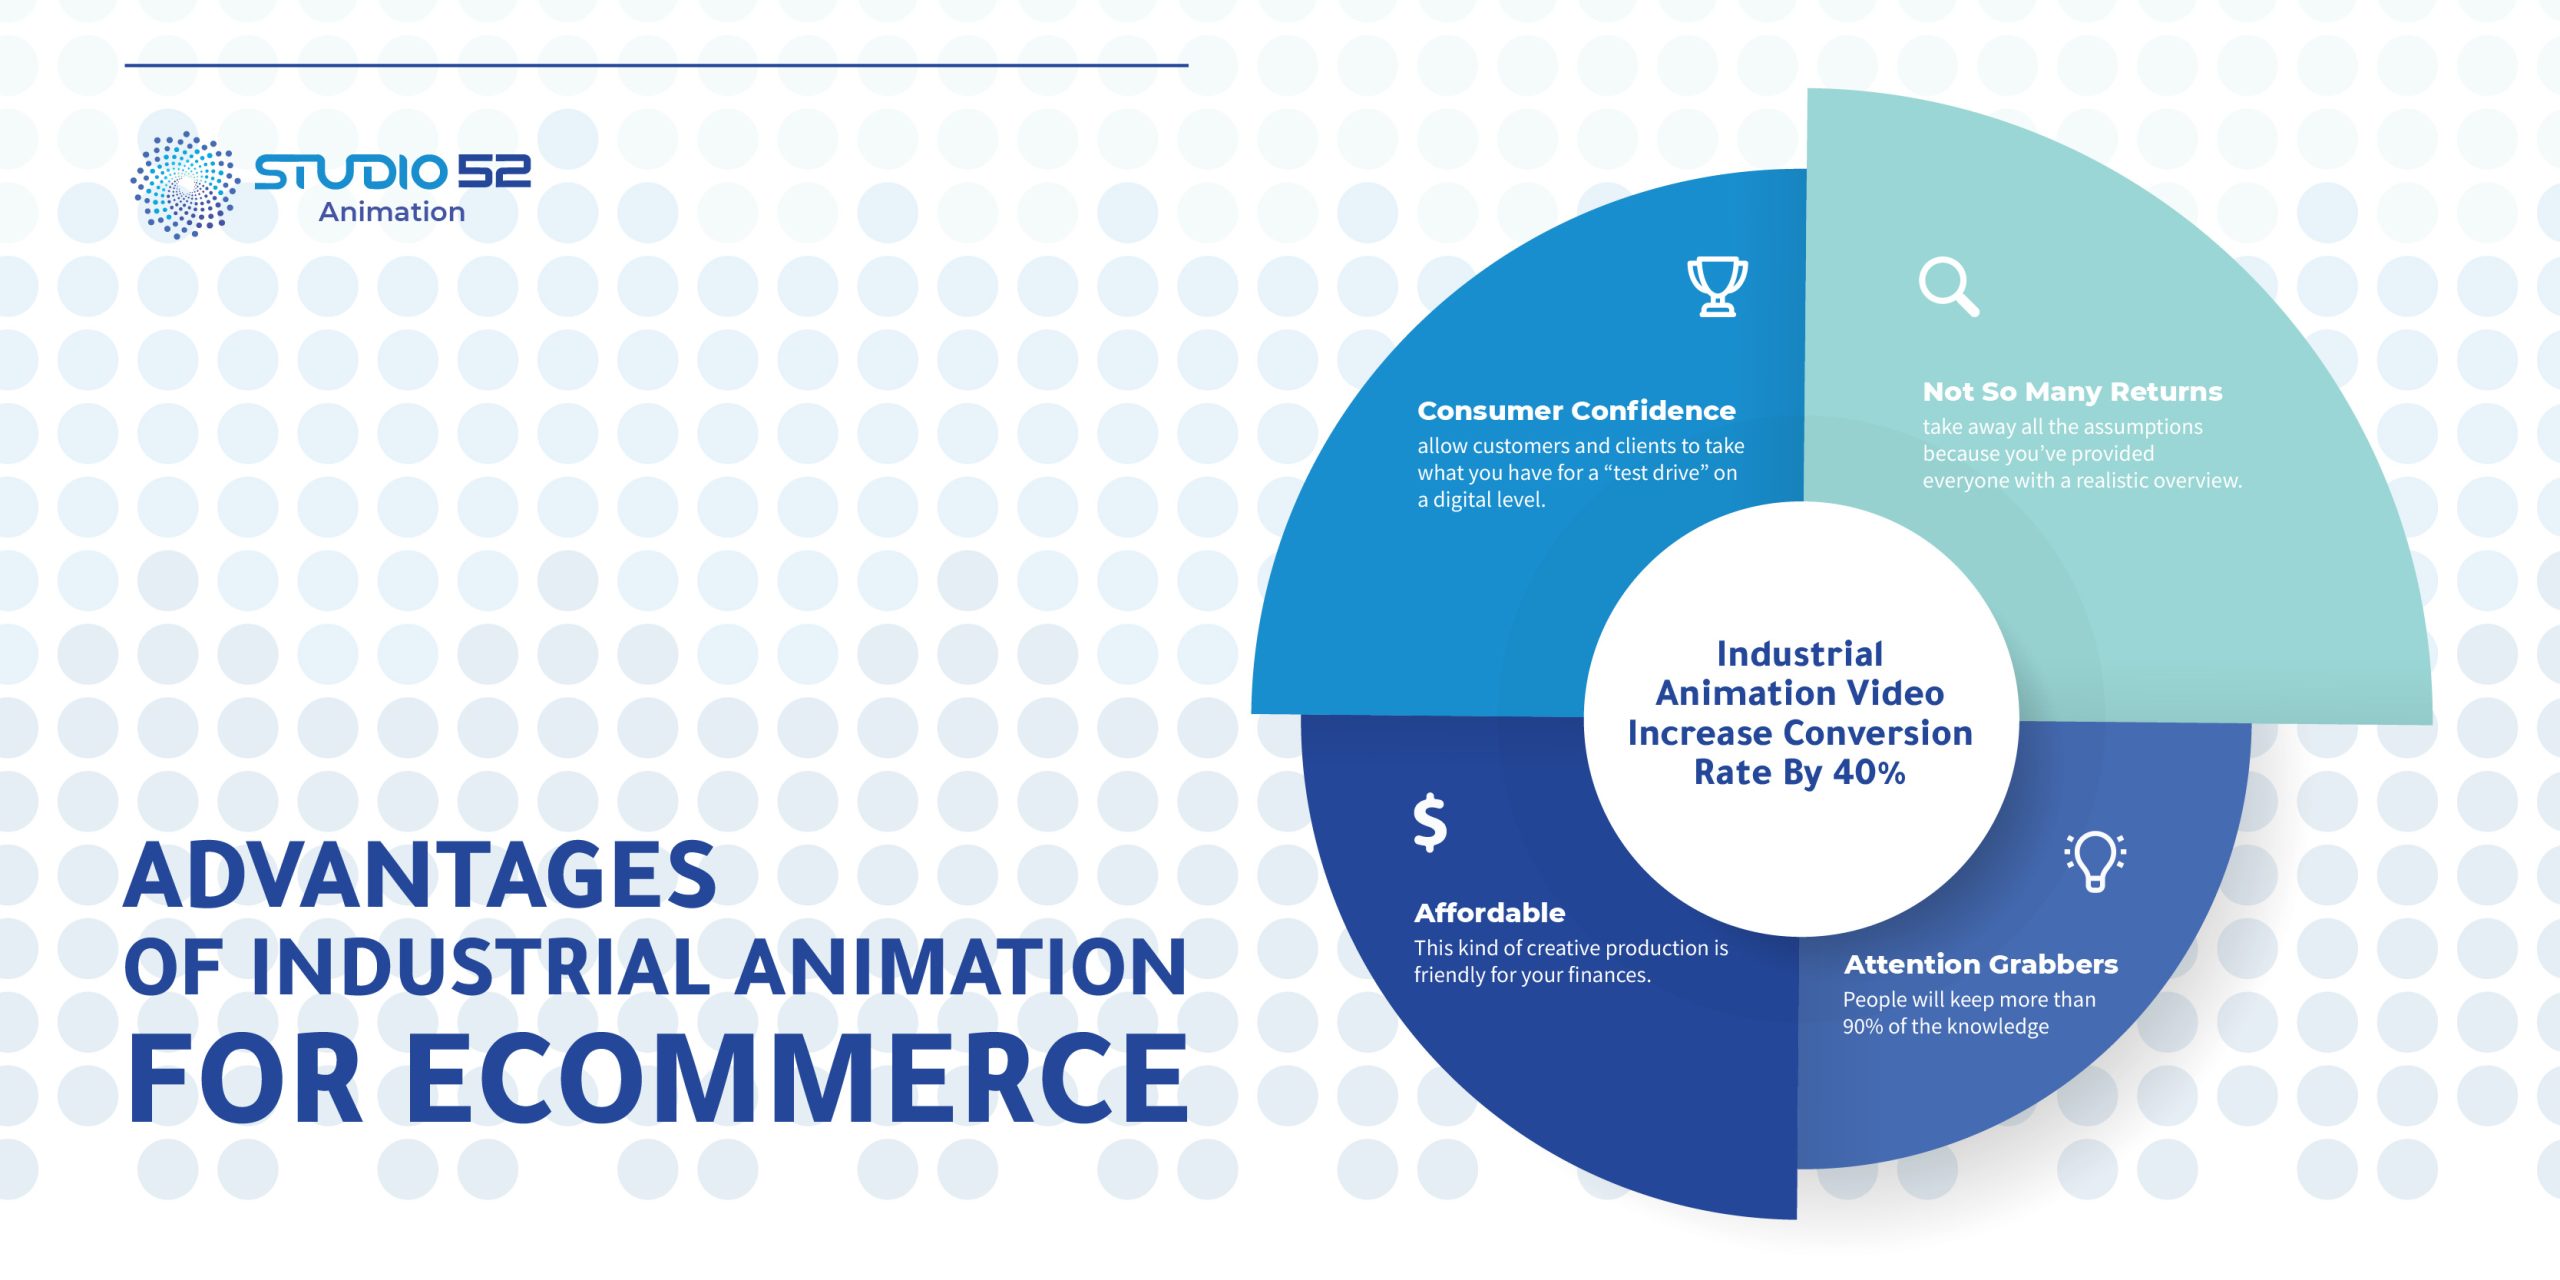 Advantages of Industrial Anmation for eCommerce